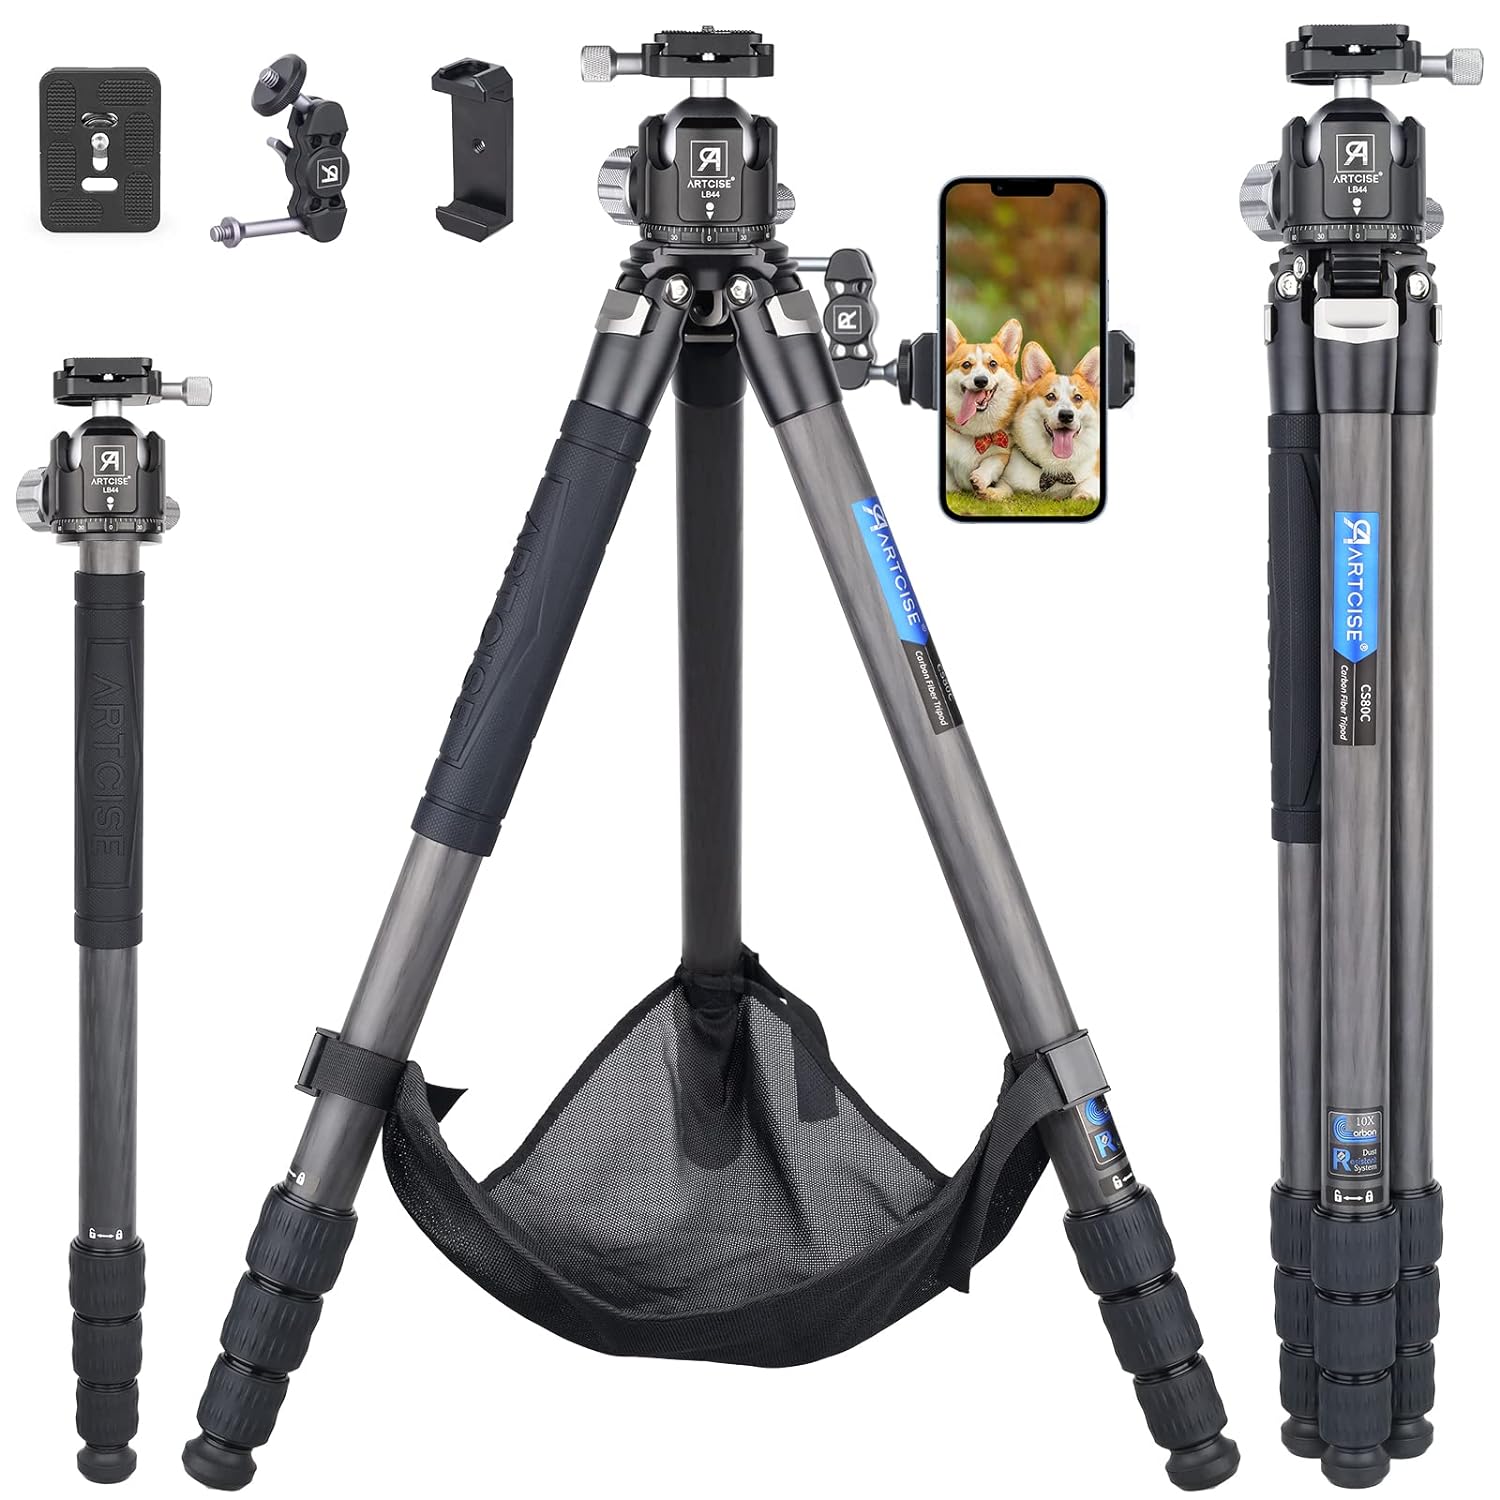 ARTCISE Stable CS80C 32.5mm Lightweight Compact Carbon Fiber Tripod with 44mm Low Profile Ball Head Kit Max Load 25 kg